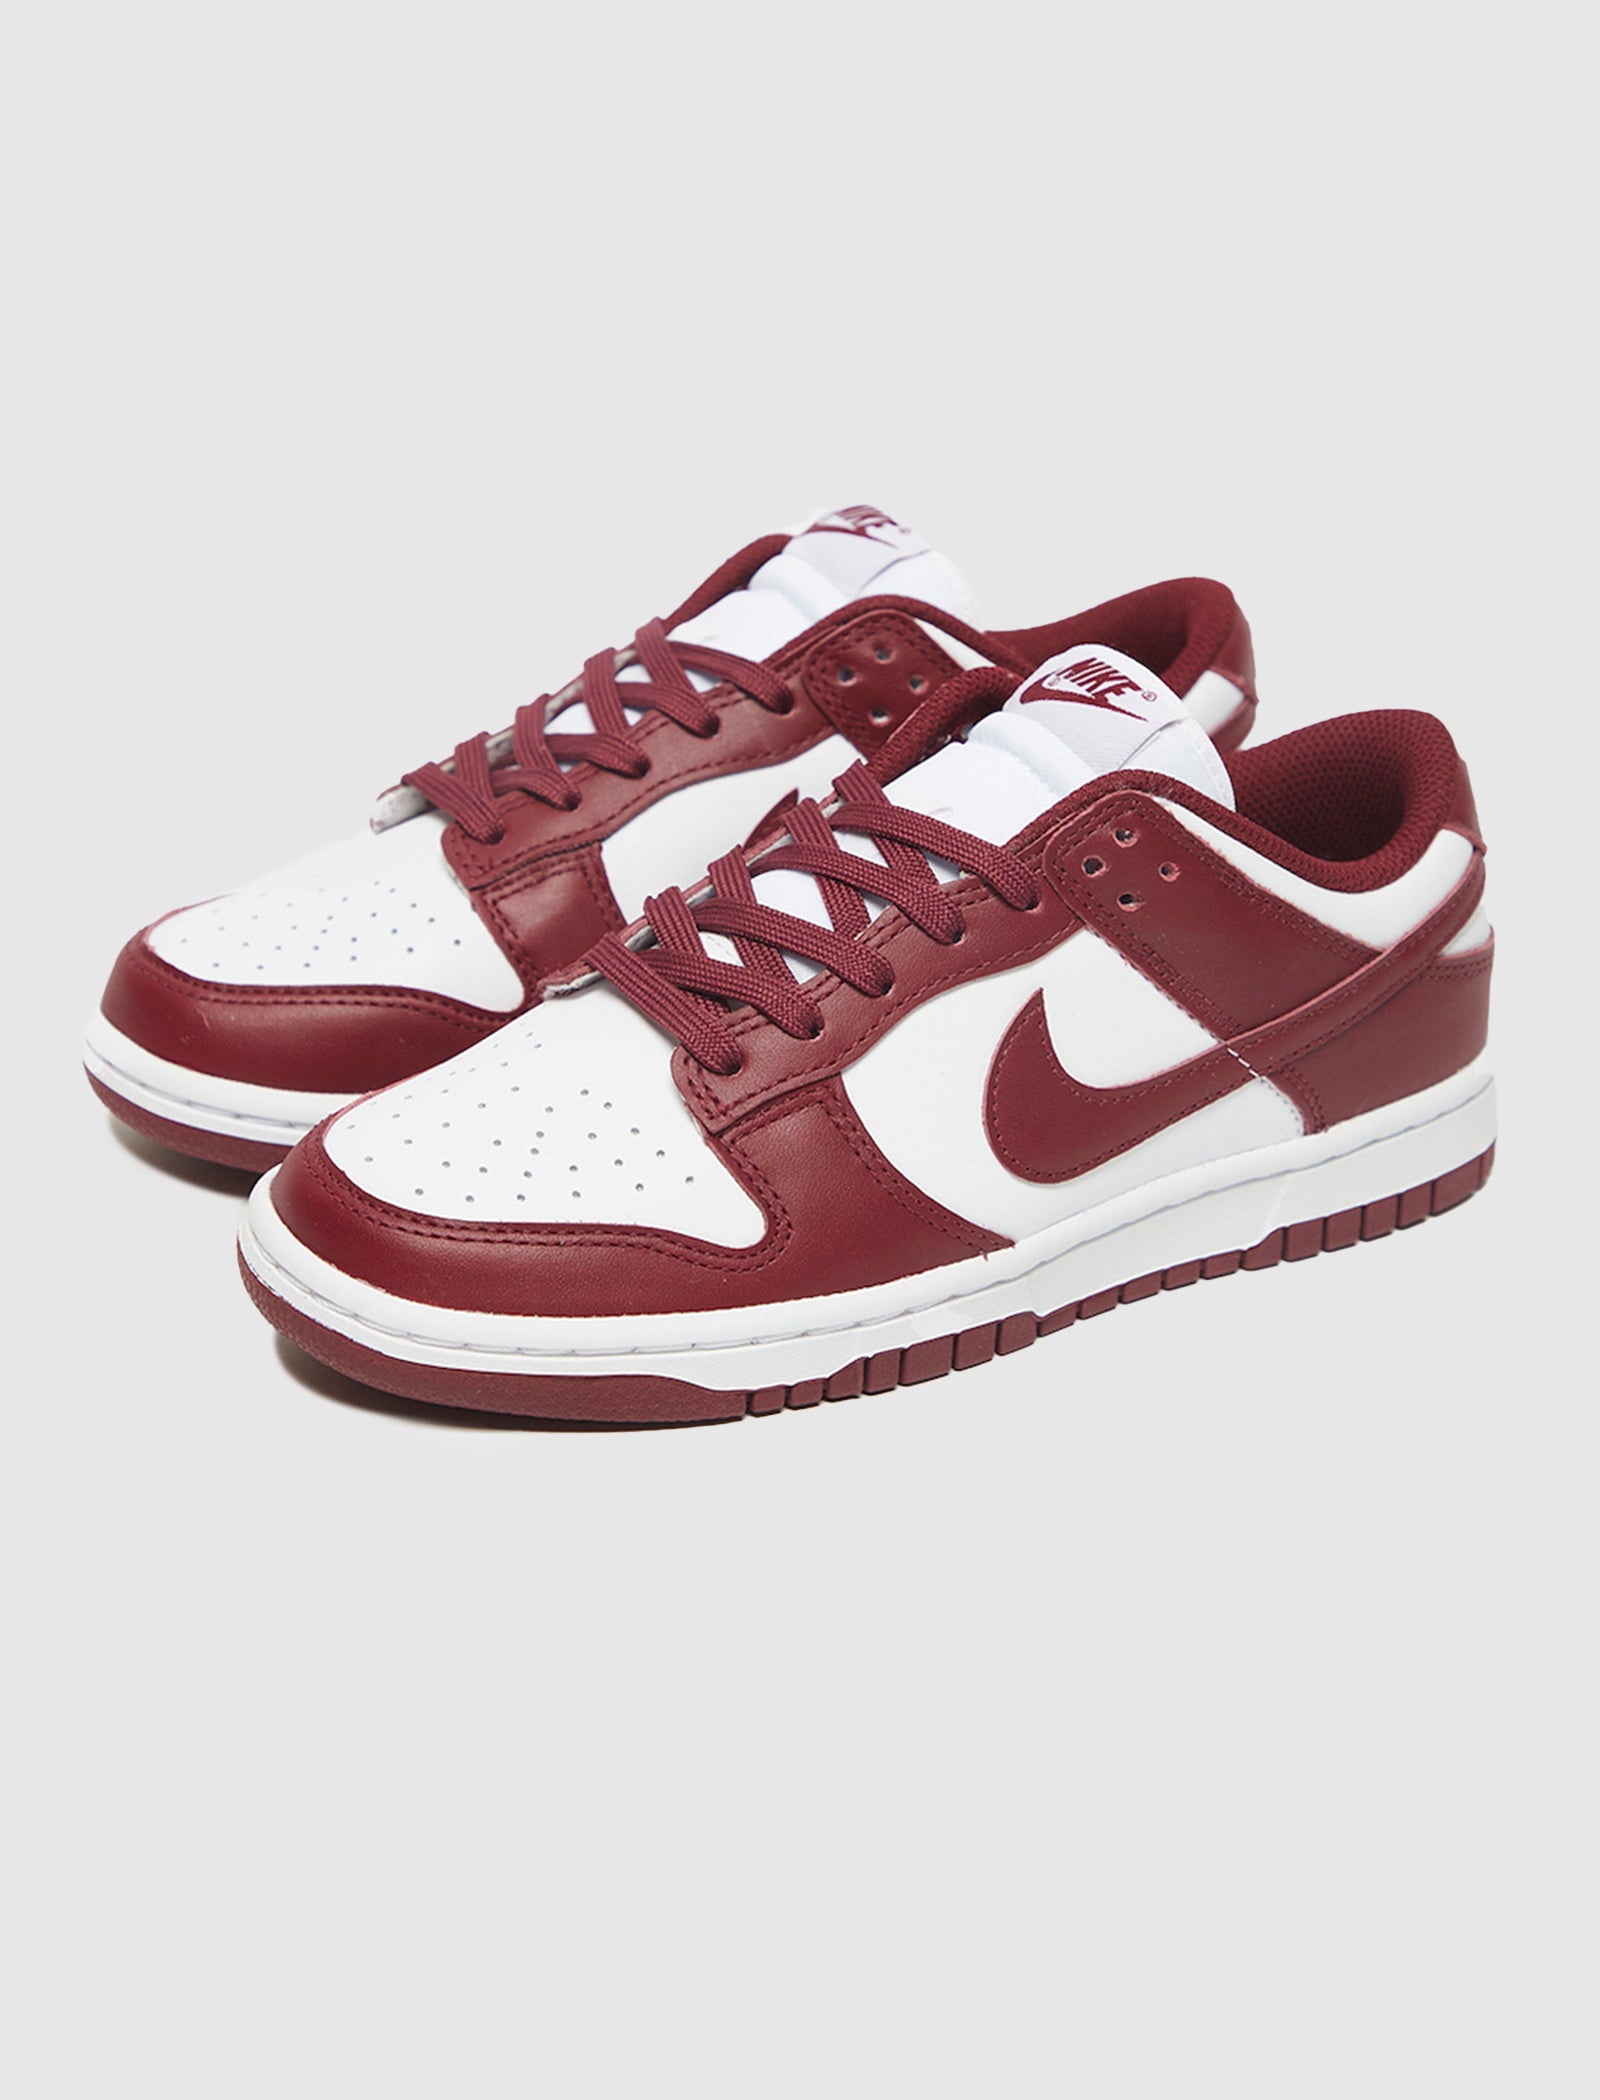 DUNK LOW "TEAM RED"